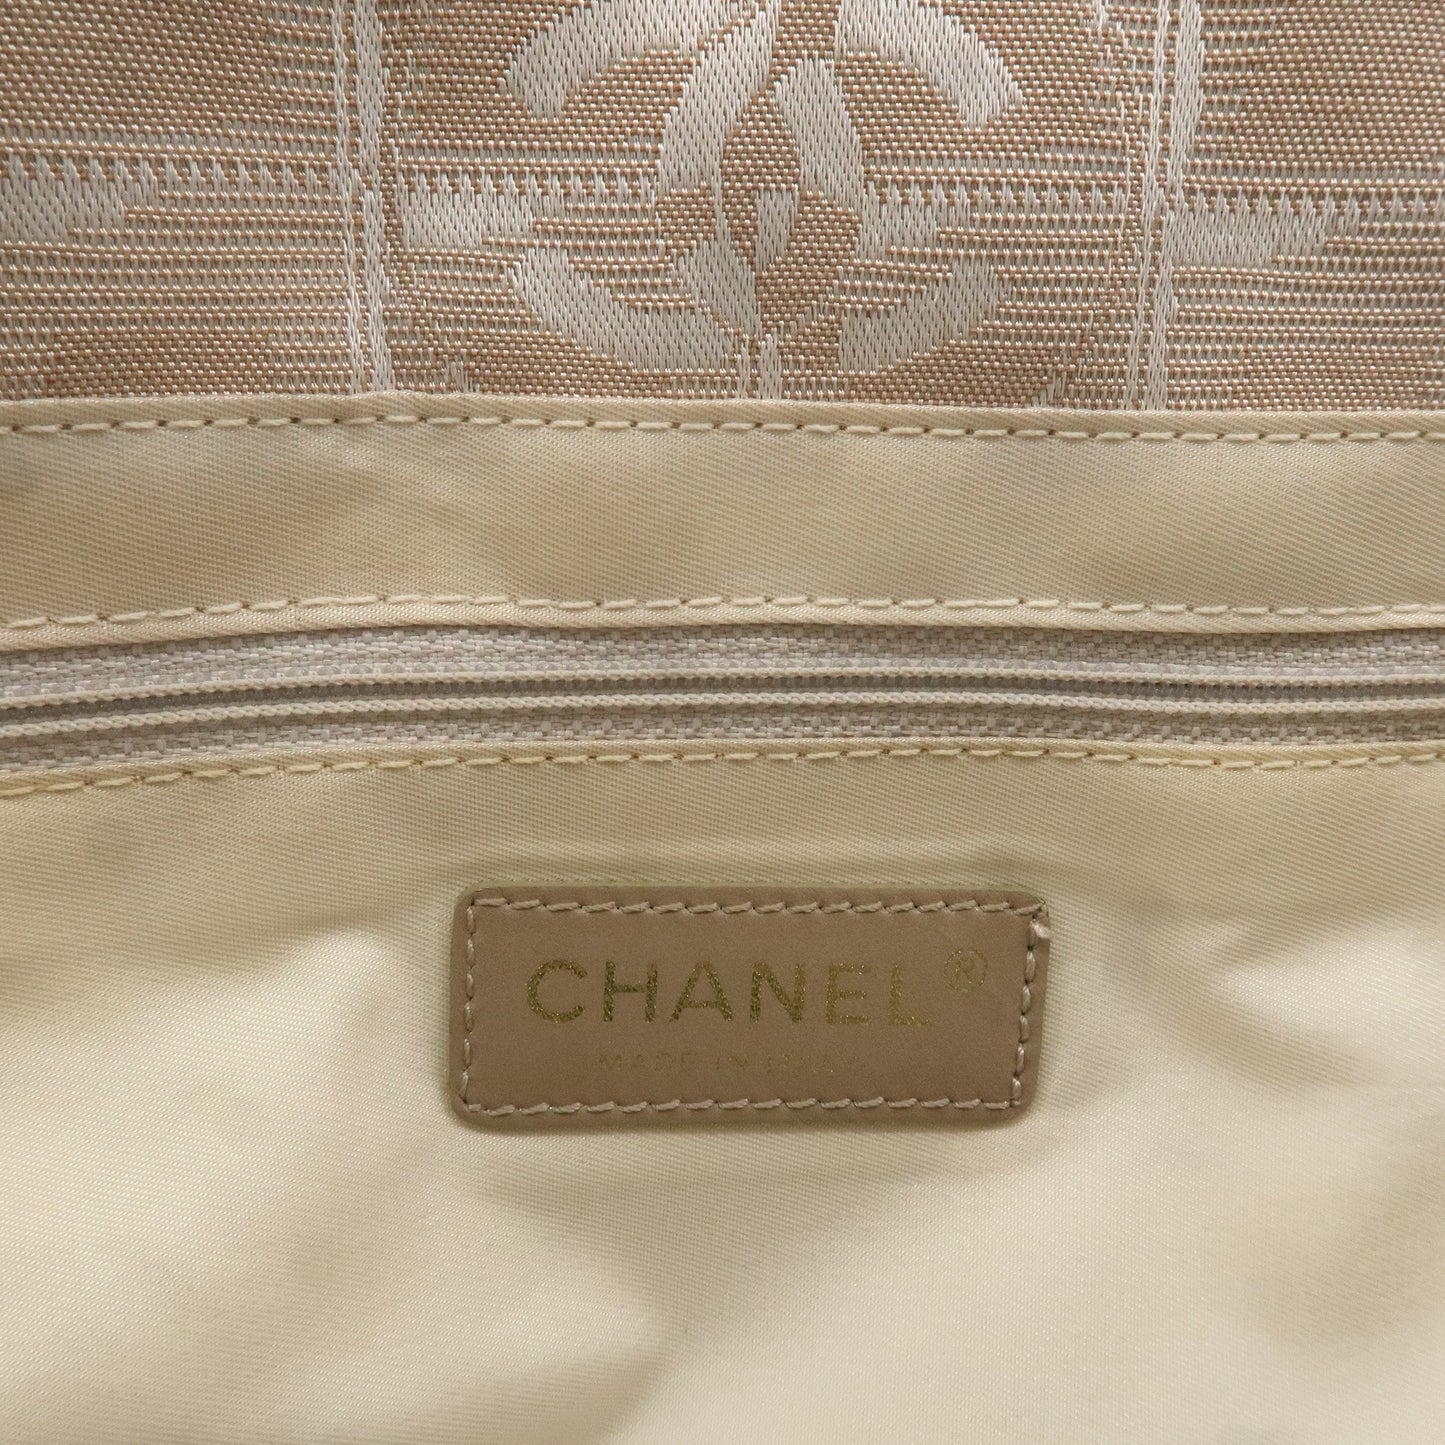 CHANEL New Travel Line Nylon Jacquard Leather Tote MM Beige A15991